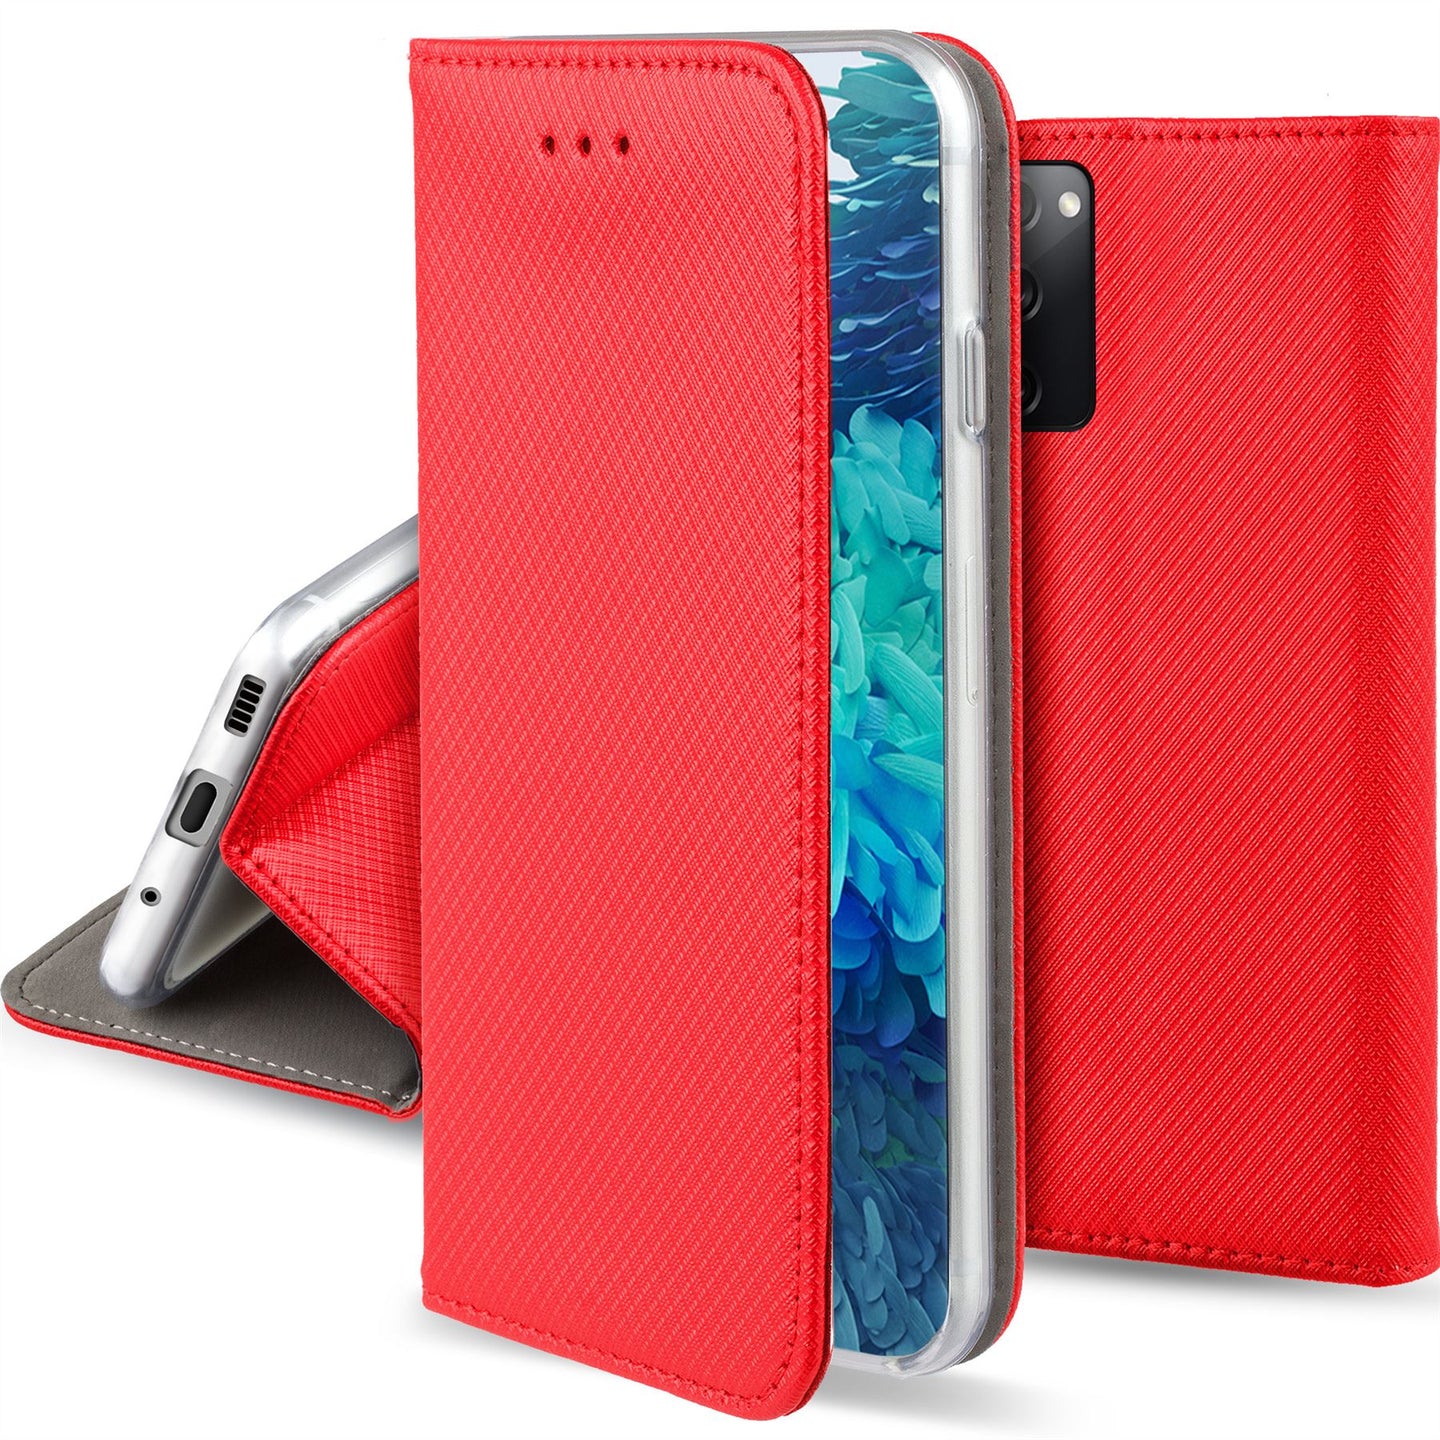 Moozy Case Flip Cover for Samsung S20 FE, Red - Smart Magnetic Flip Case with Card Holder and Stand